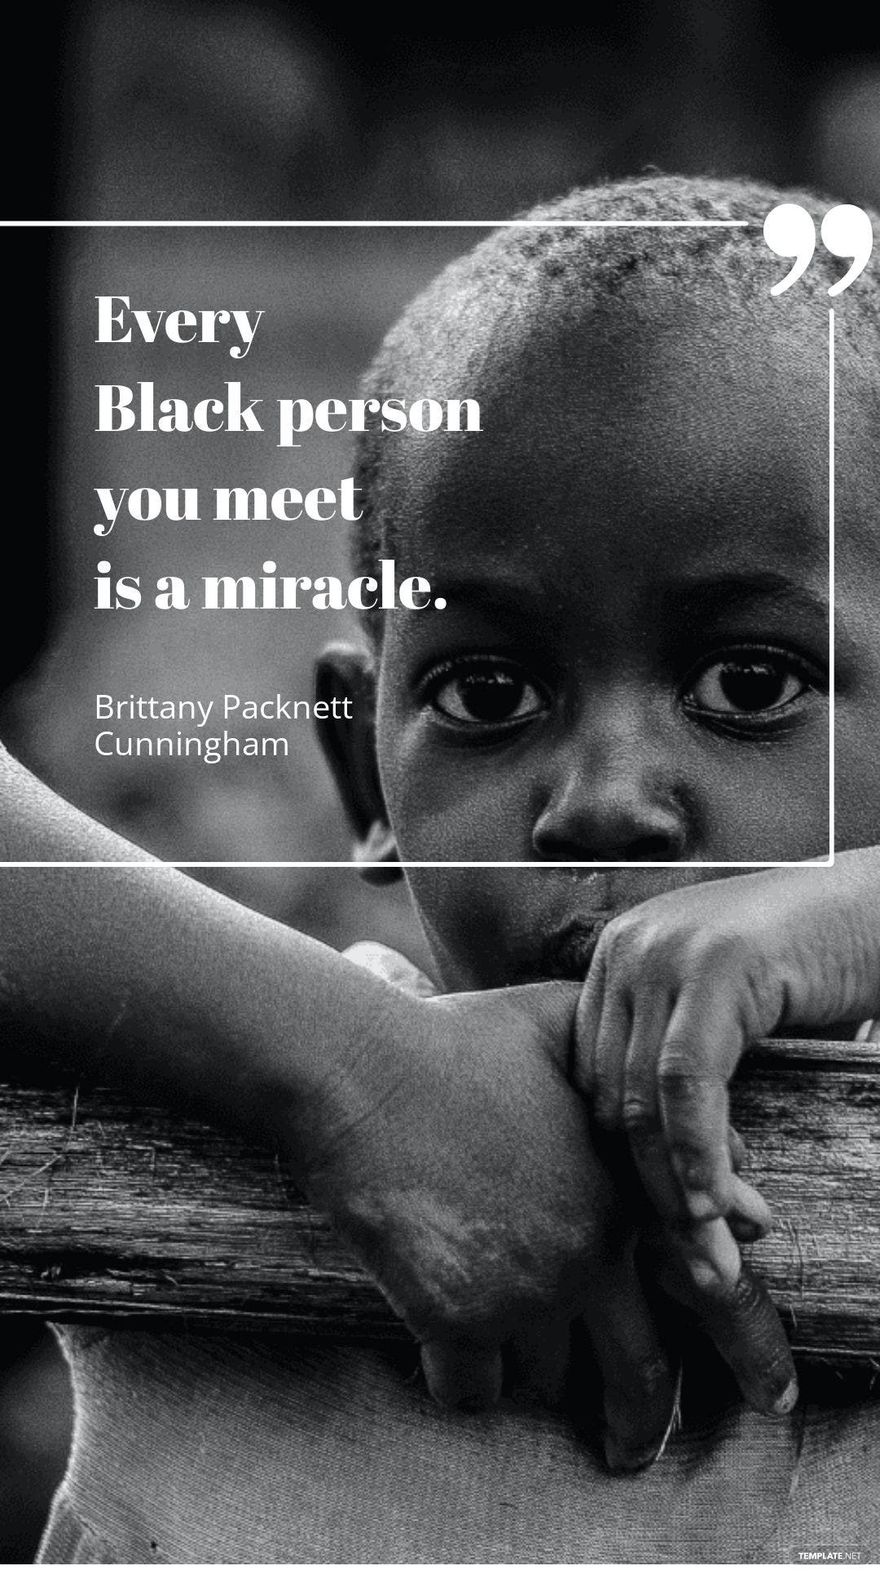 Brittany Packnett Cunningham - Every Black person you meet is a miracle.